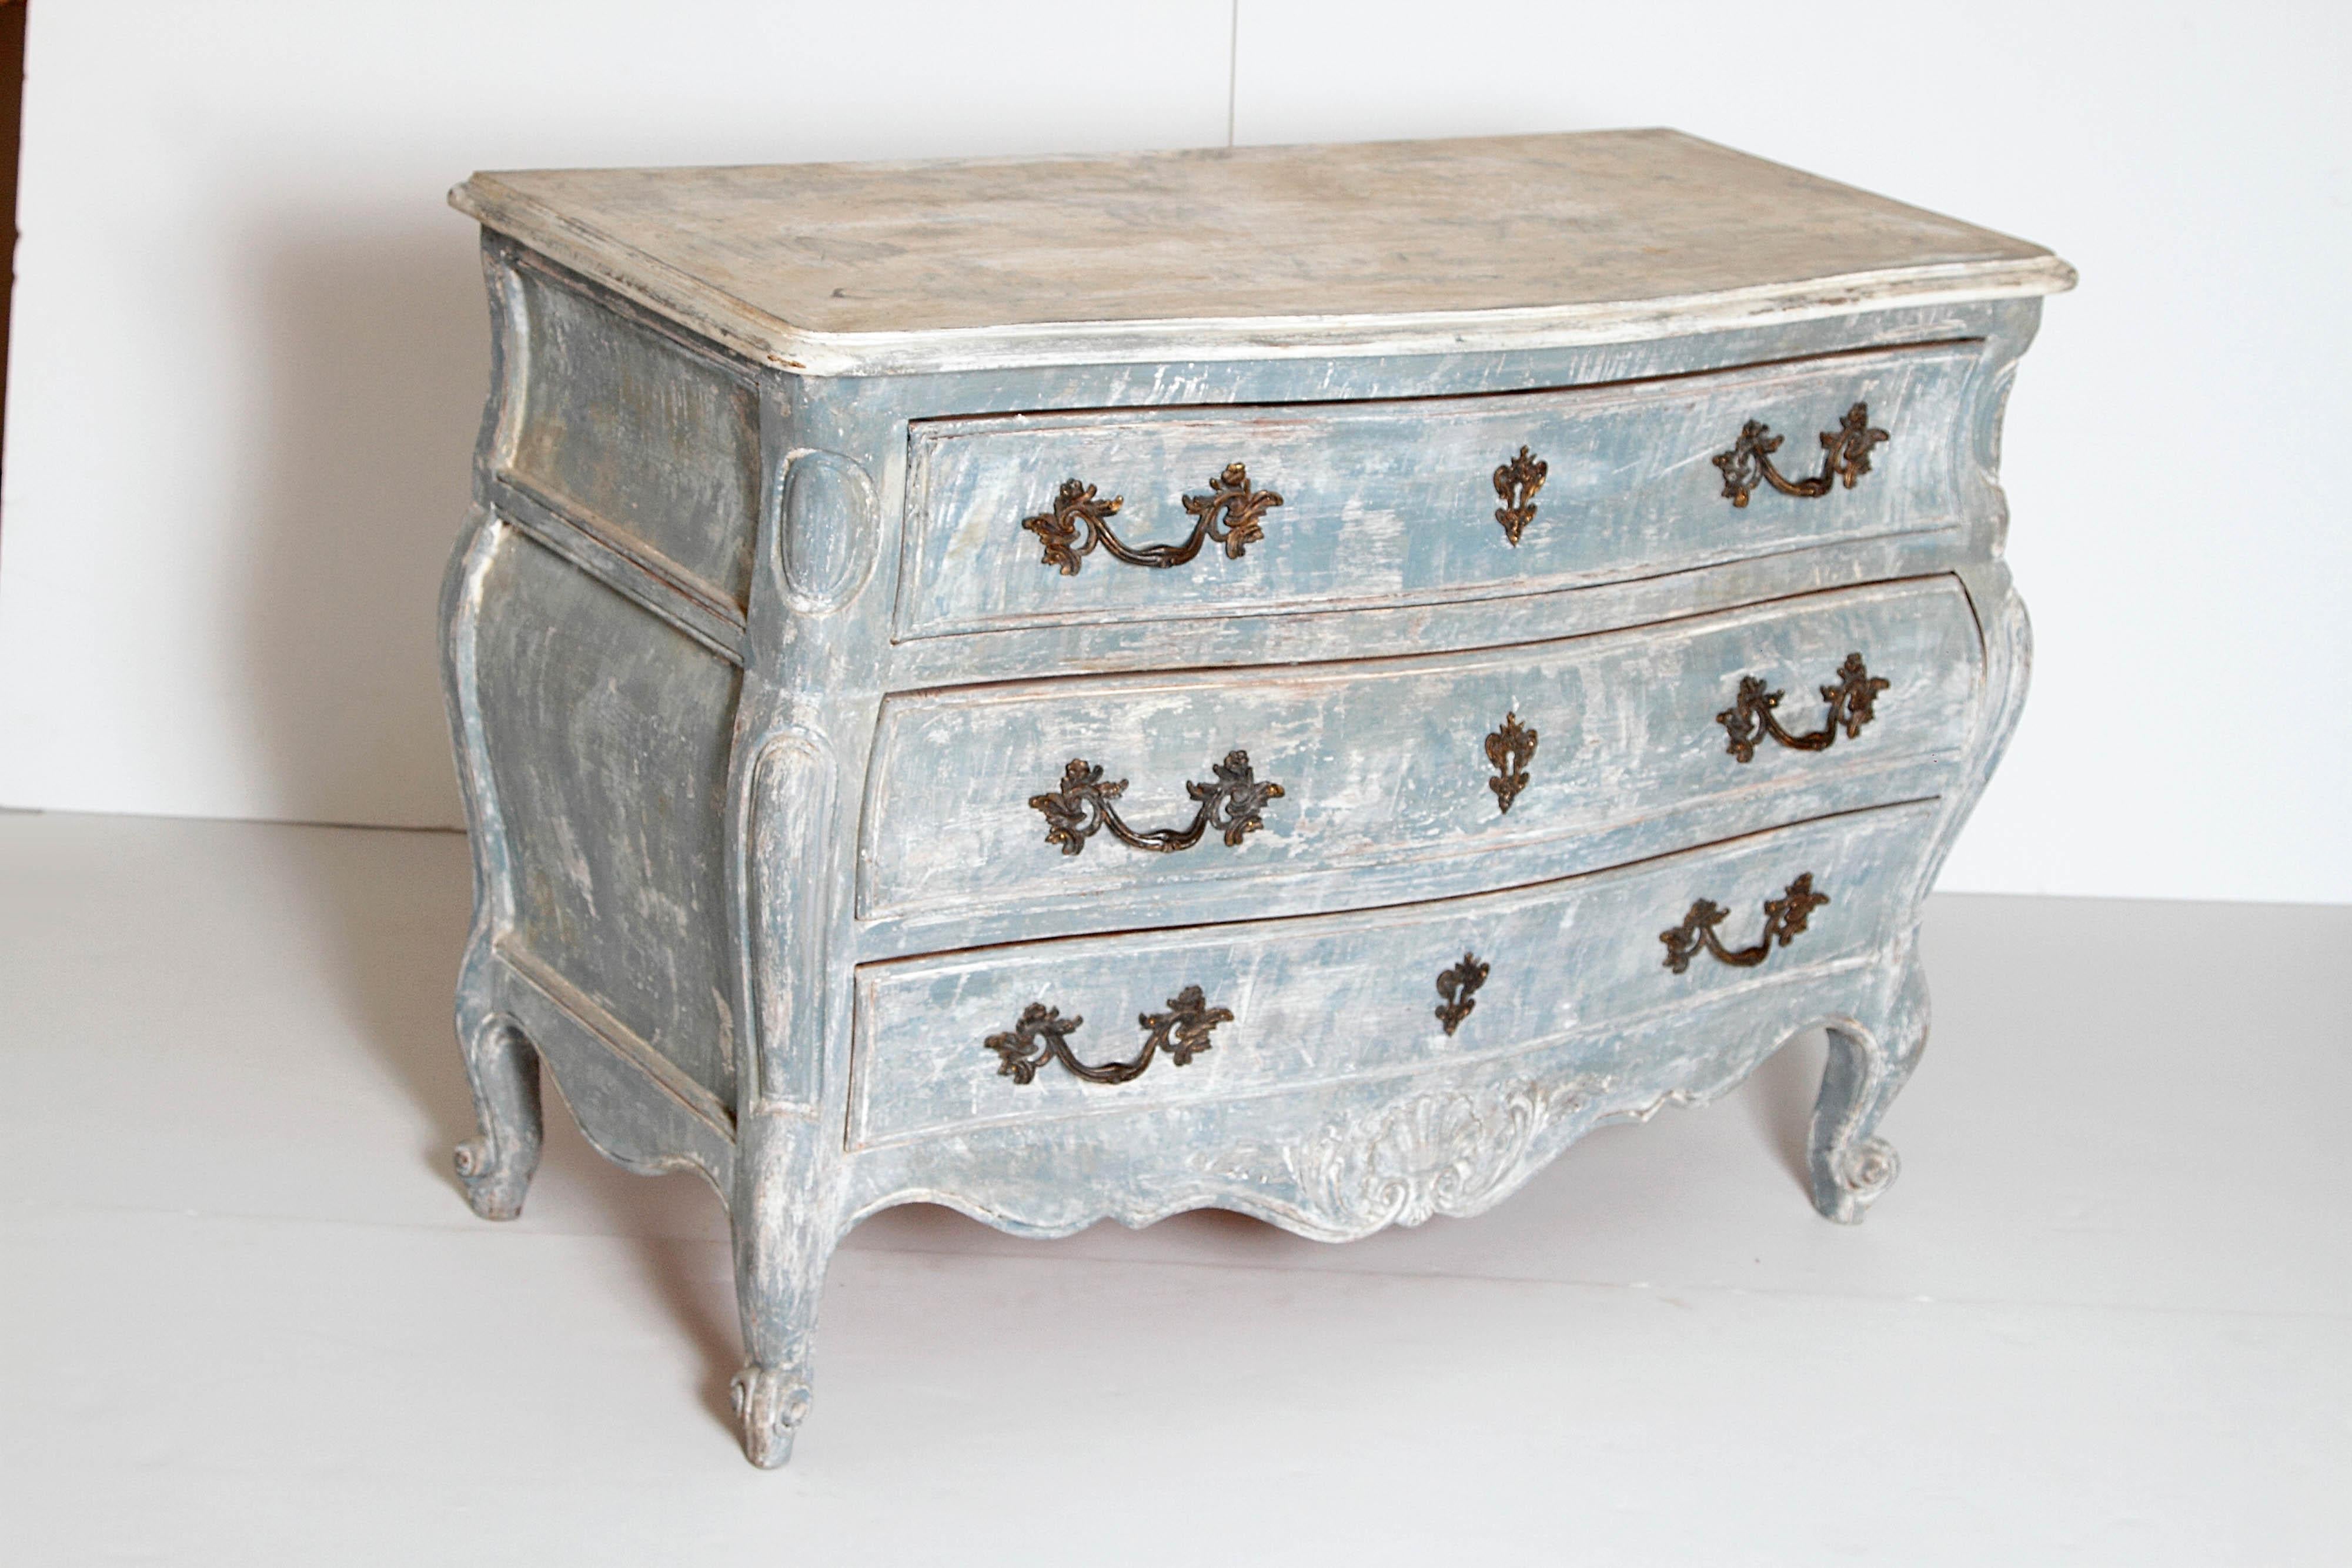 This is a wonderful antique French commode with a weathered painted finish and a serpentine wood top. The carved bombe shape sides terminate in cabriole legs with scroll feet. The three drawers with original bronze pulls and key hole escutcheons sit